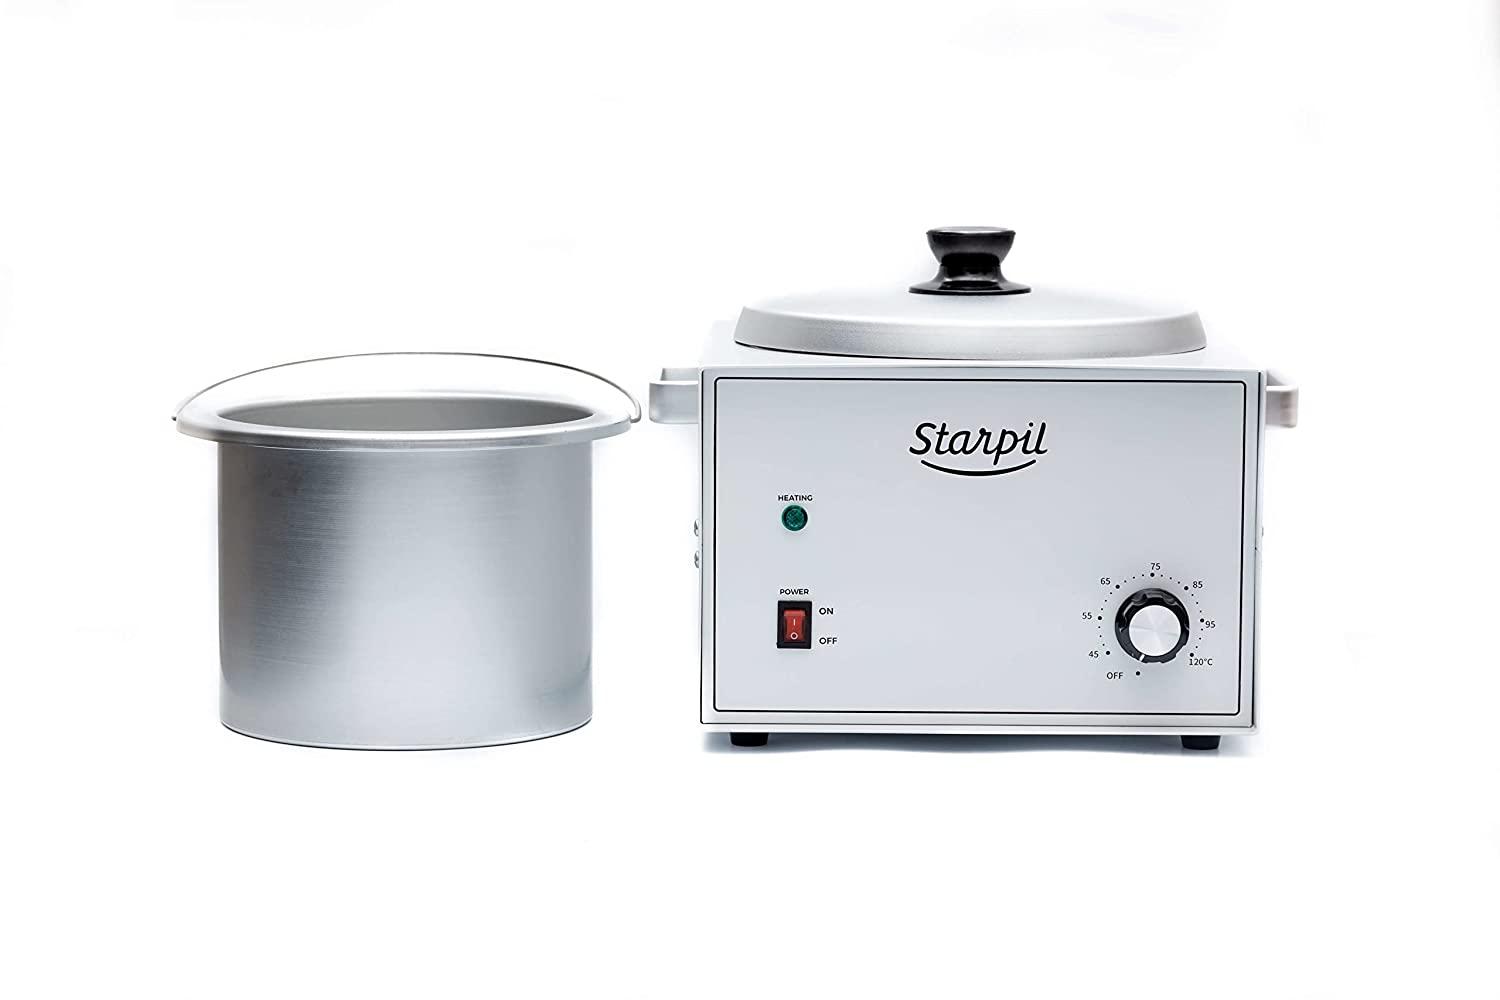 Starpil Wax Machine - Mini Wax Warmer for Hair Removal 4oz / 125g - Best for Hard Wax Beads - Use for Hair Removal - Adjustable